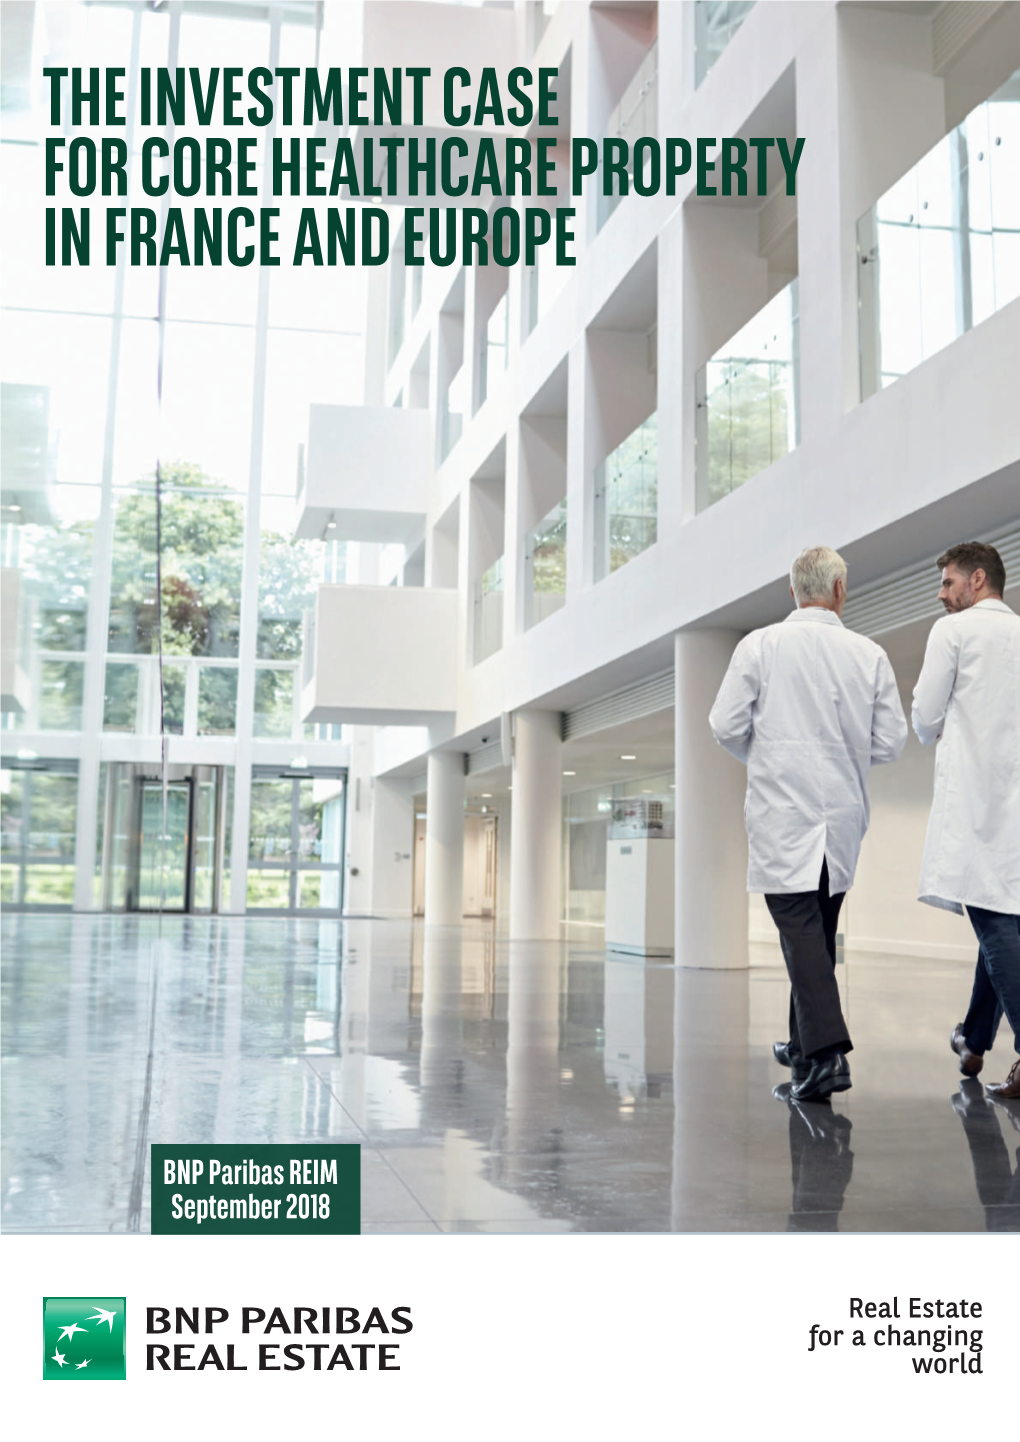 The Investment Case for Core Healthcare Property in France and Europe